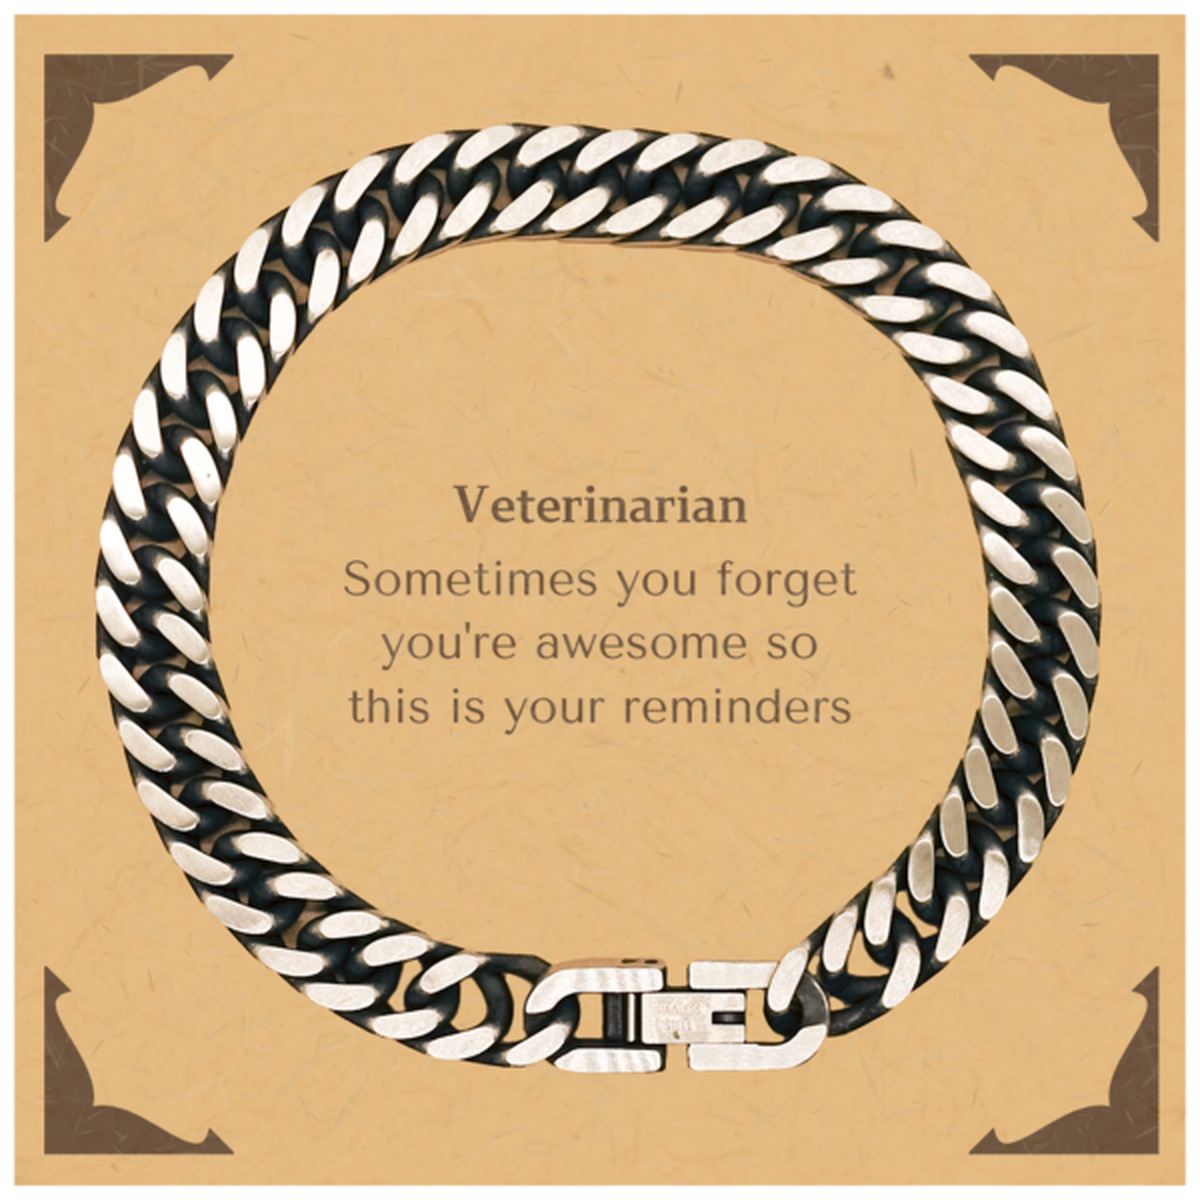 Sentimental Veterinarian Cuban Link Chain Bracelet, Veterinarian Sometimes you forget you're awesome so this is your reminders, Graduation Christmas Birthday Gifts for Veterinarian, Men, Women, Coworkers